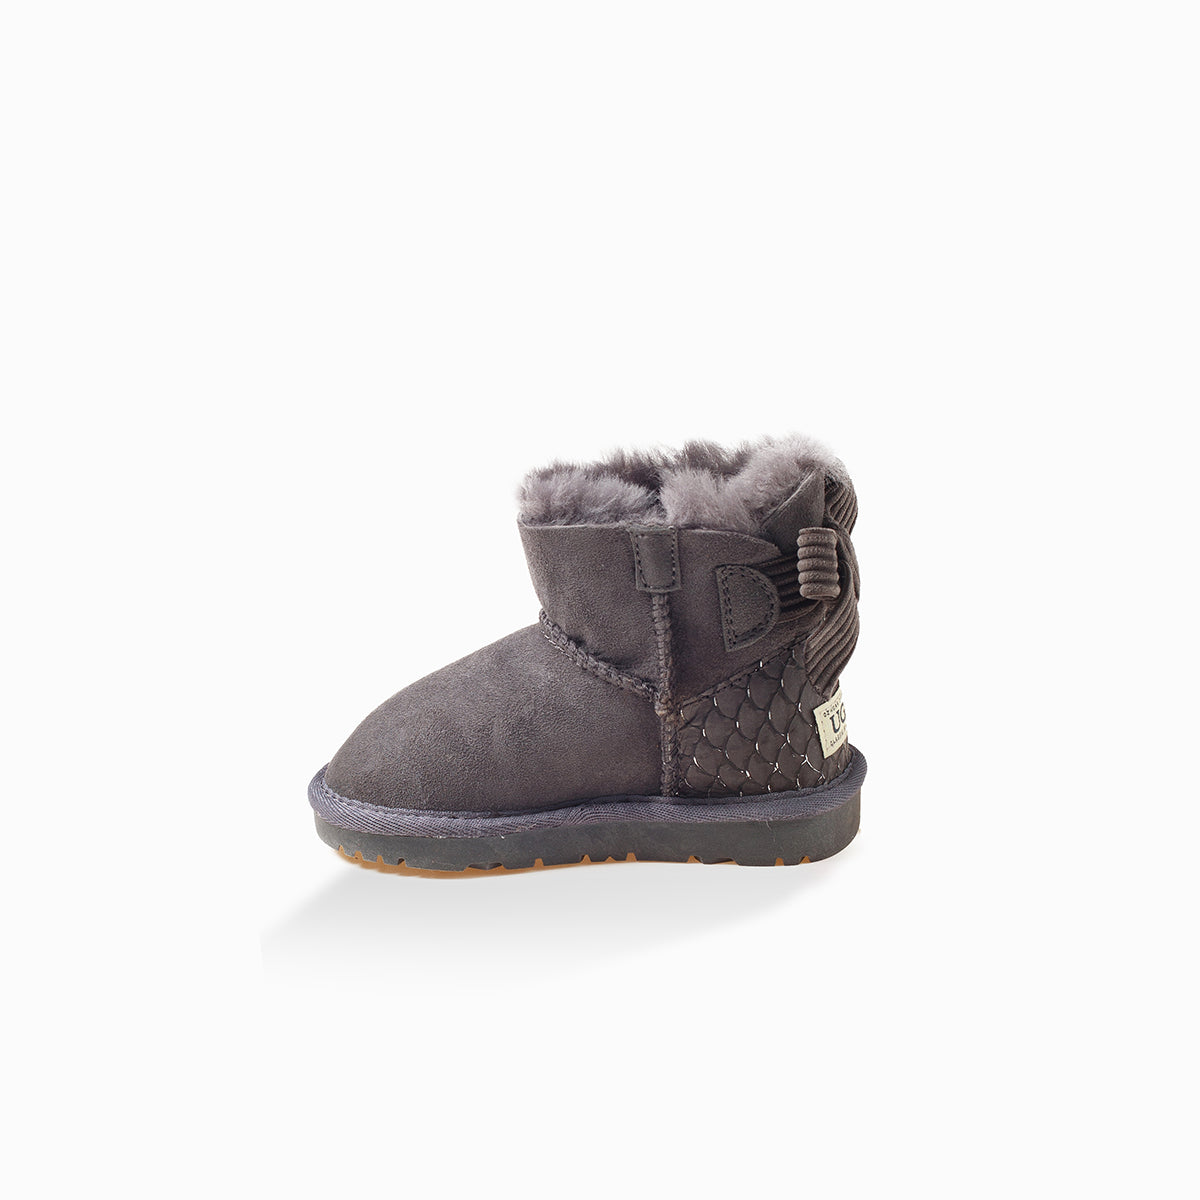 Ugg Kids One Bailey Bow Corduroy Boots (Water Resistants)-Kid Boots-PEROZ Accessories